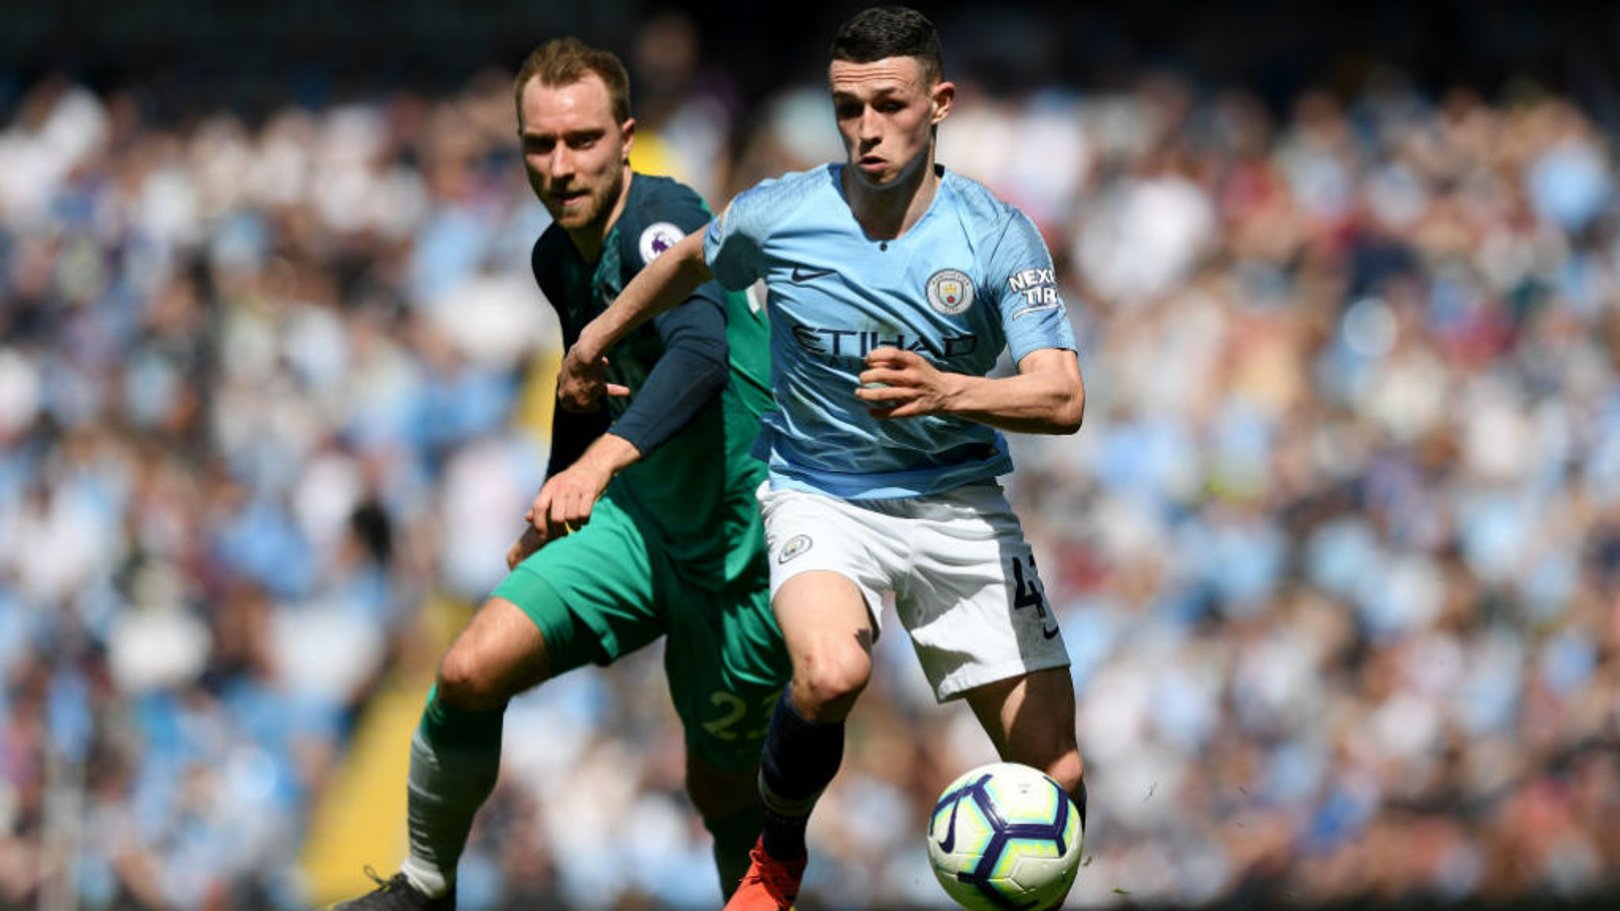 Guardiola: Foden will thrive from Spurs showing